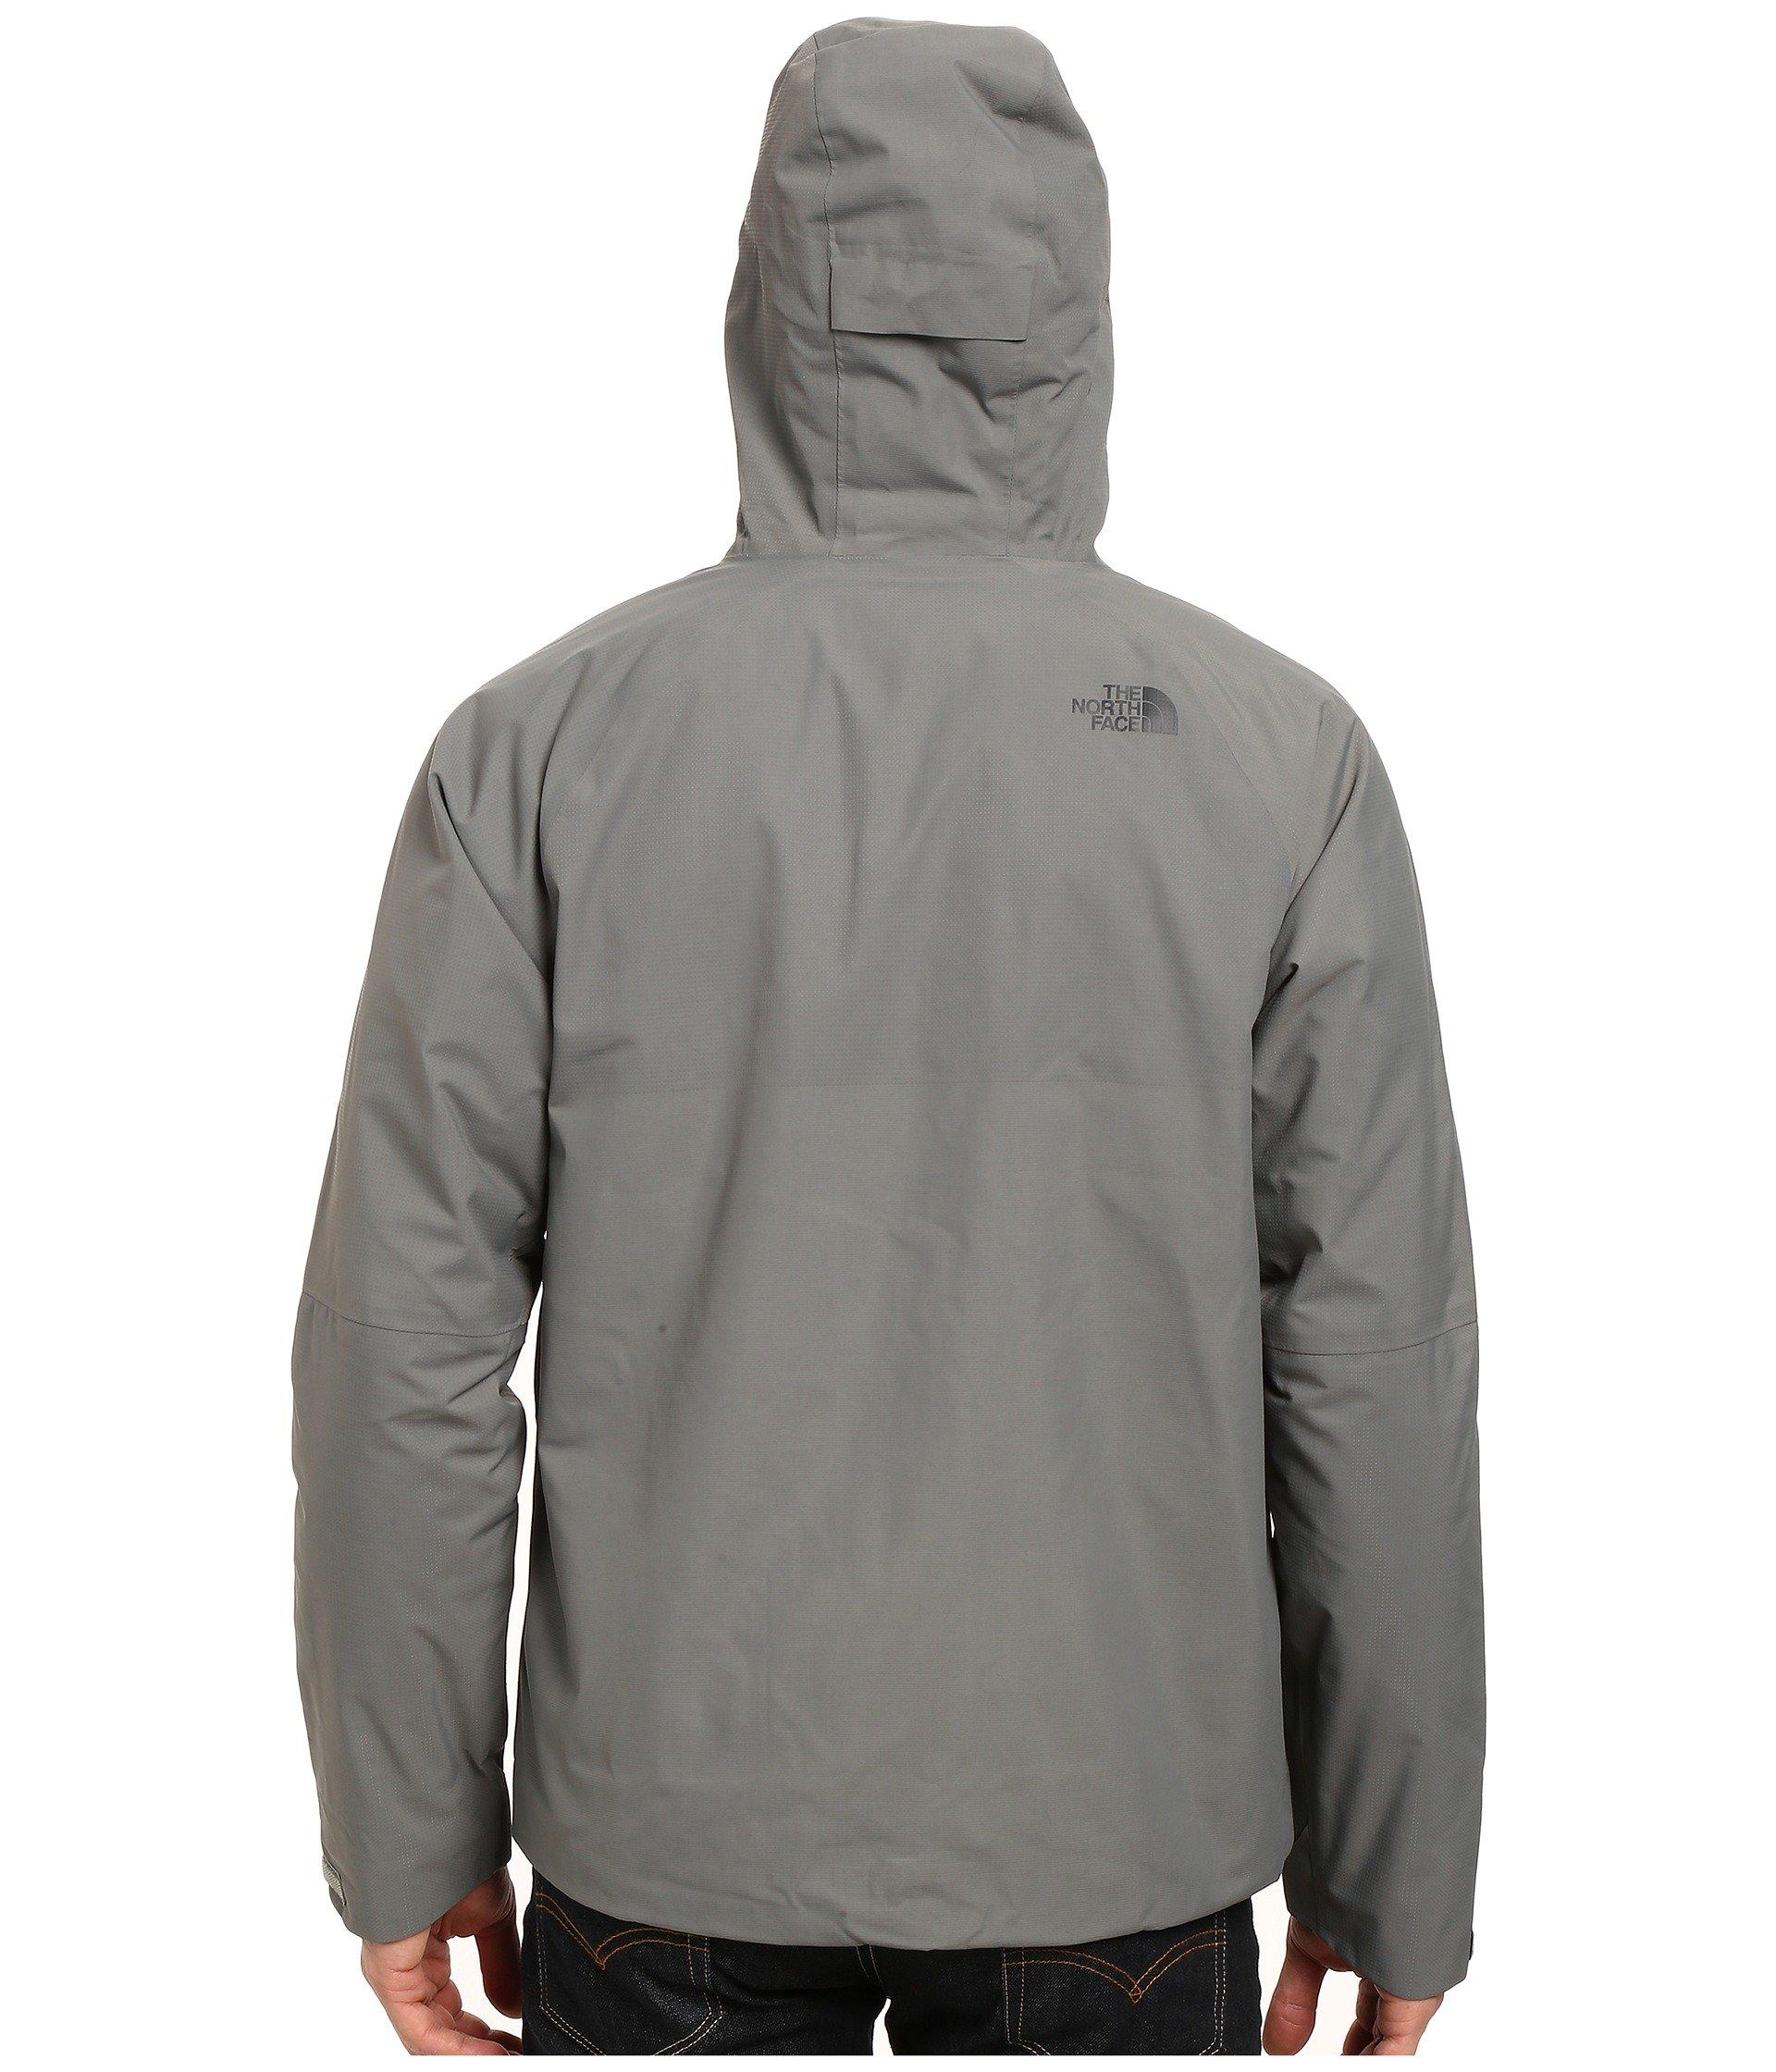 The North Face Fuseform Apoc Jacket Top Sellers, 50% OFF |  www.salumipedroni.com